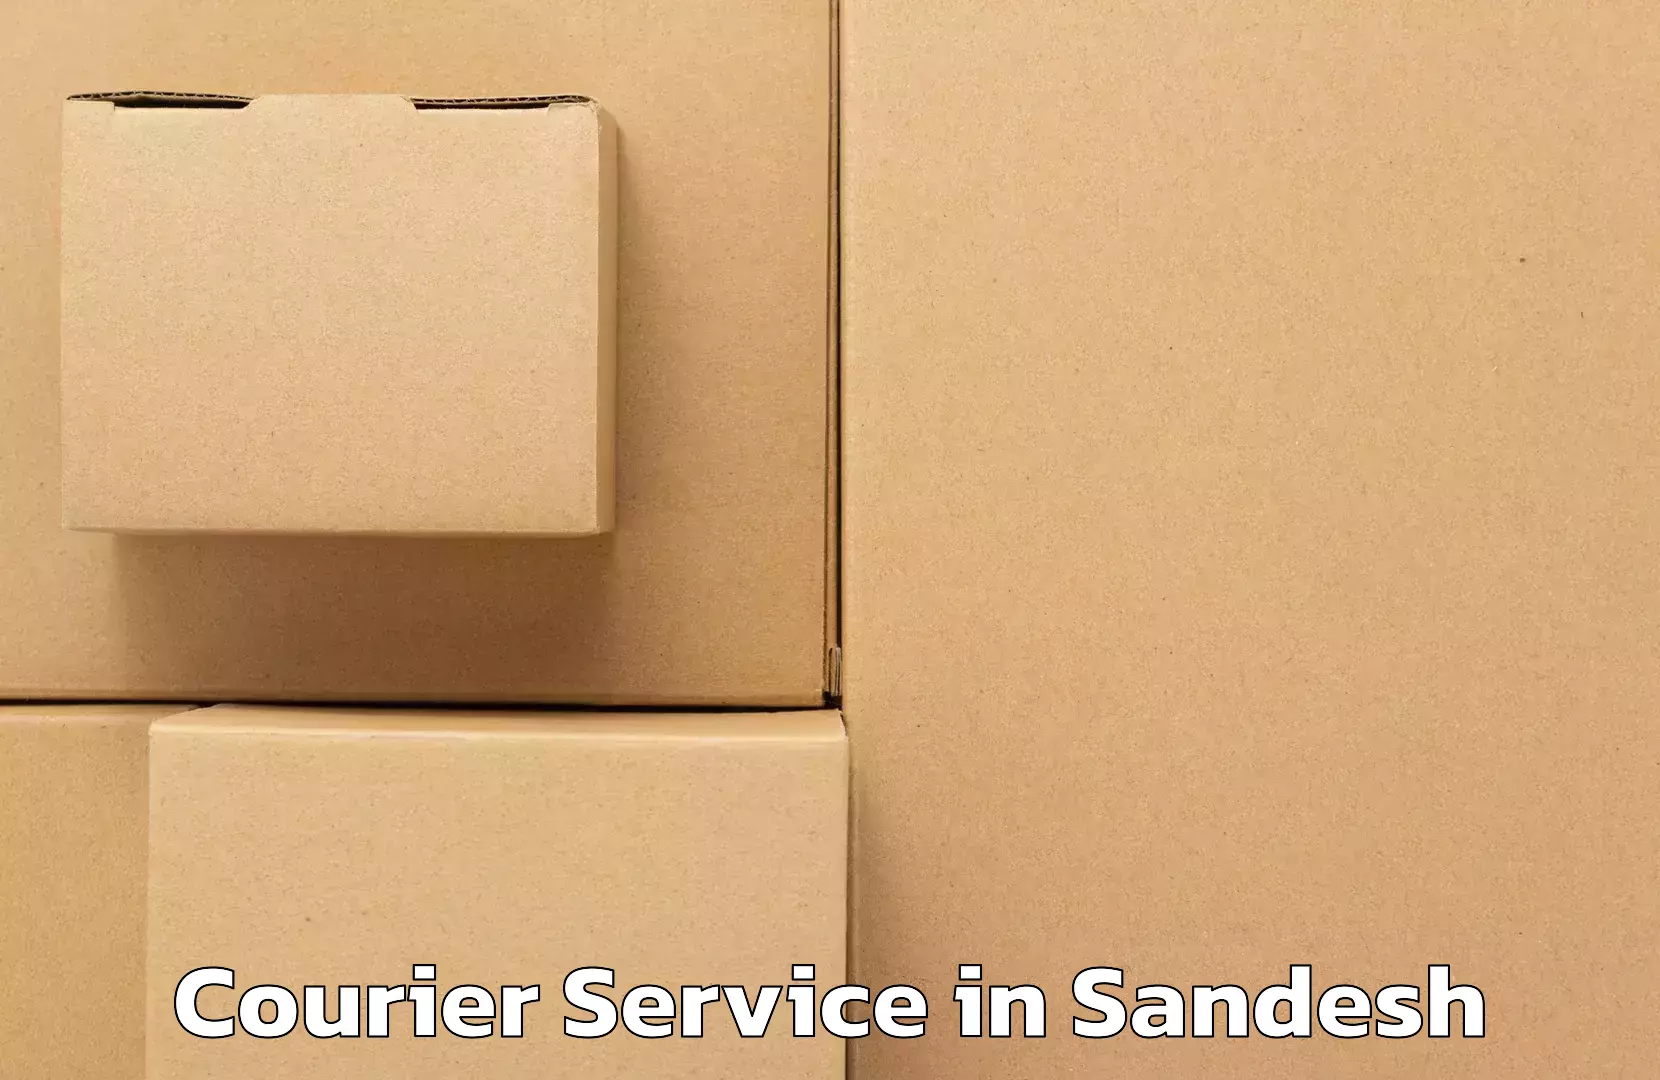 End-to-end delivery in Sandesh